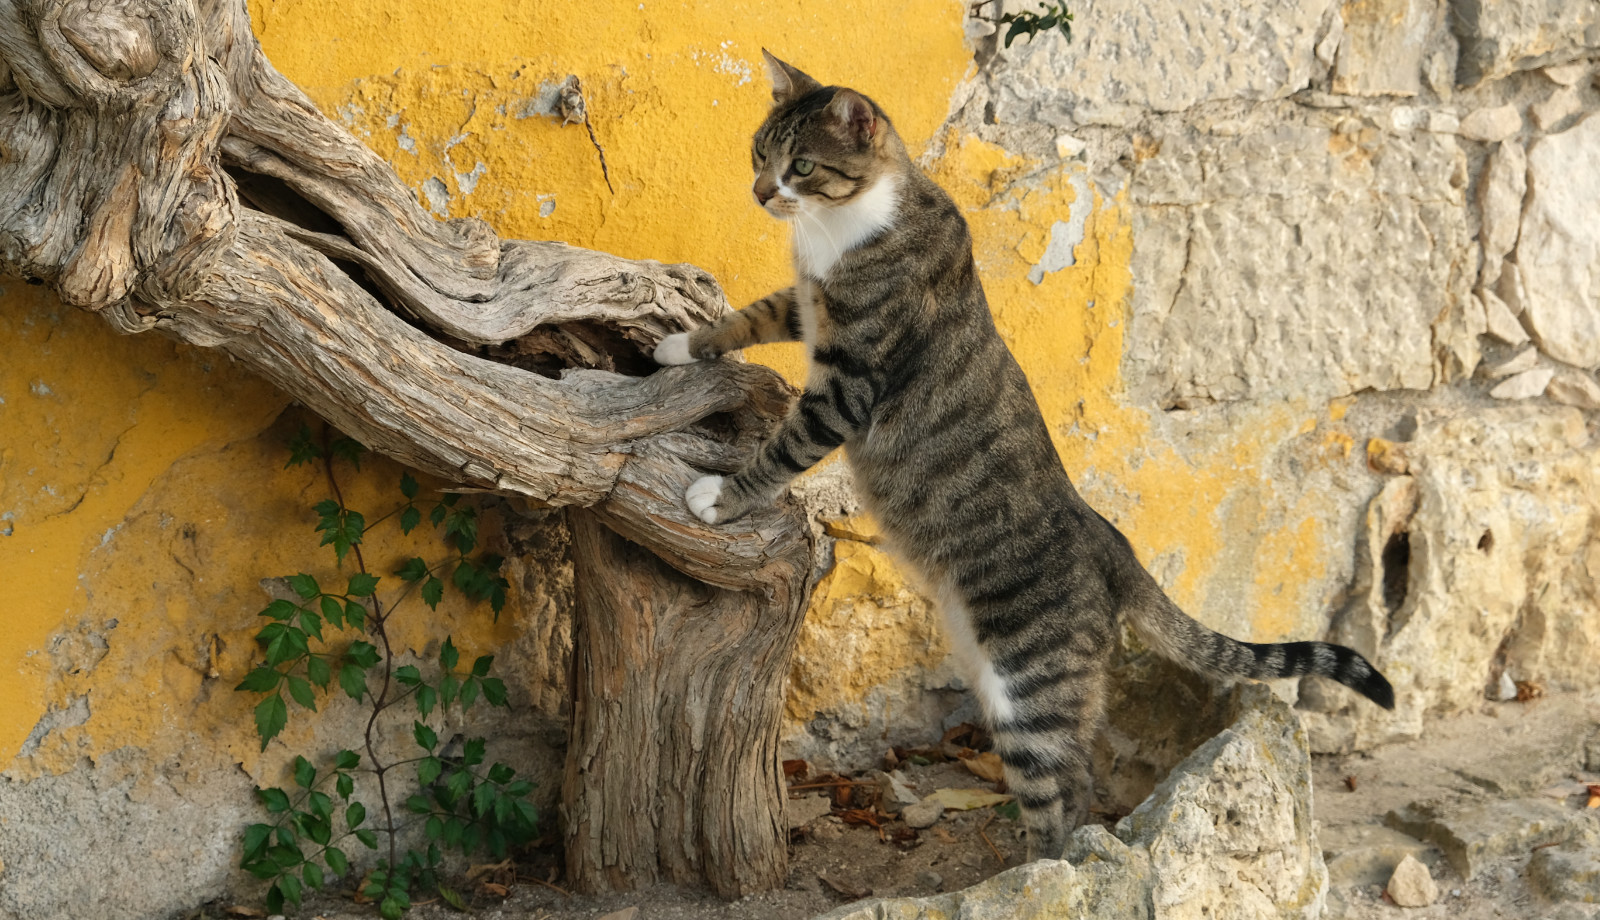 A brown tabby and white cat climbing up a thick vine against a sunny yellow wall